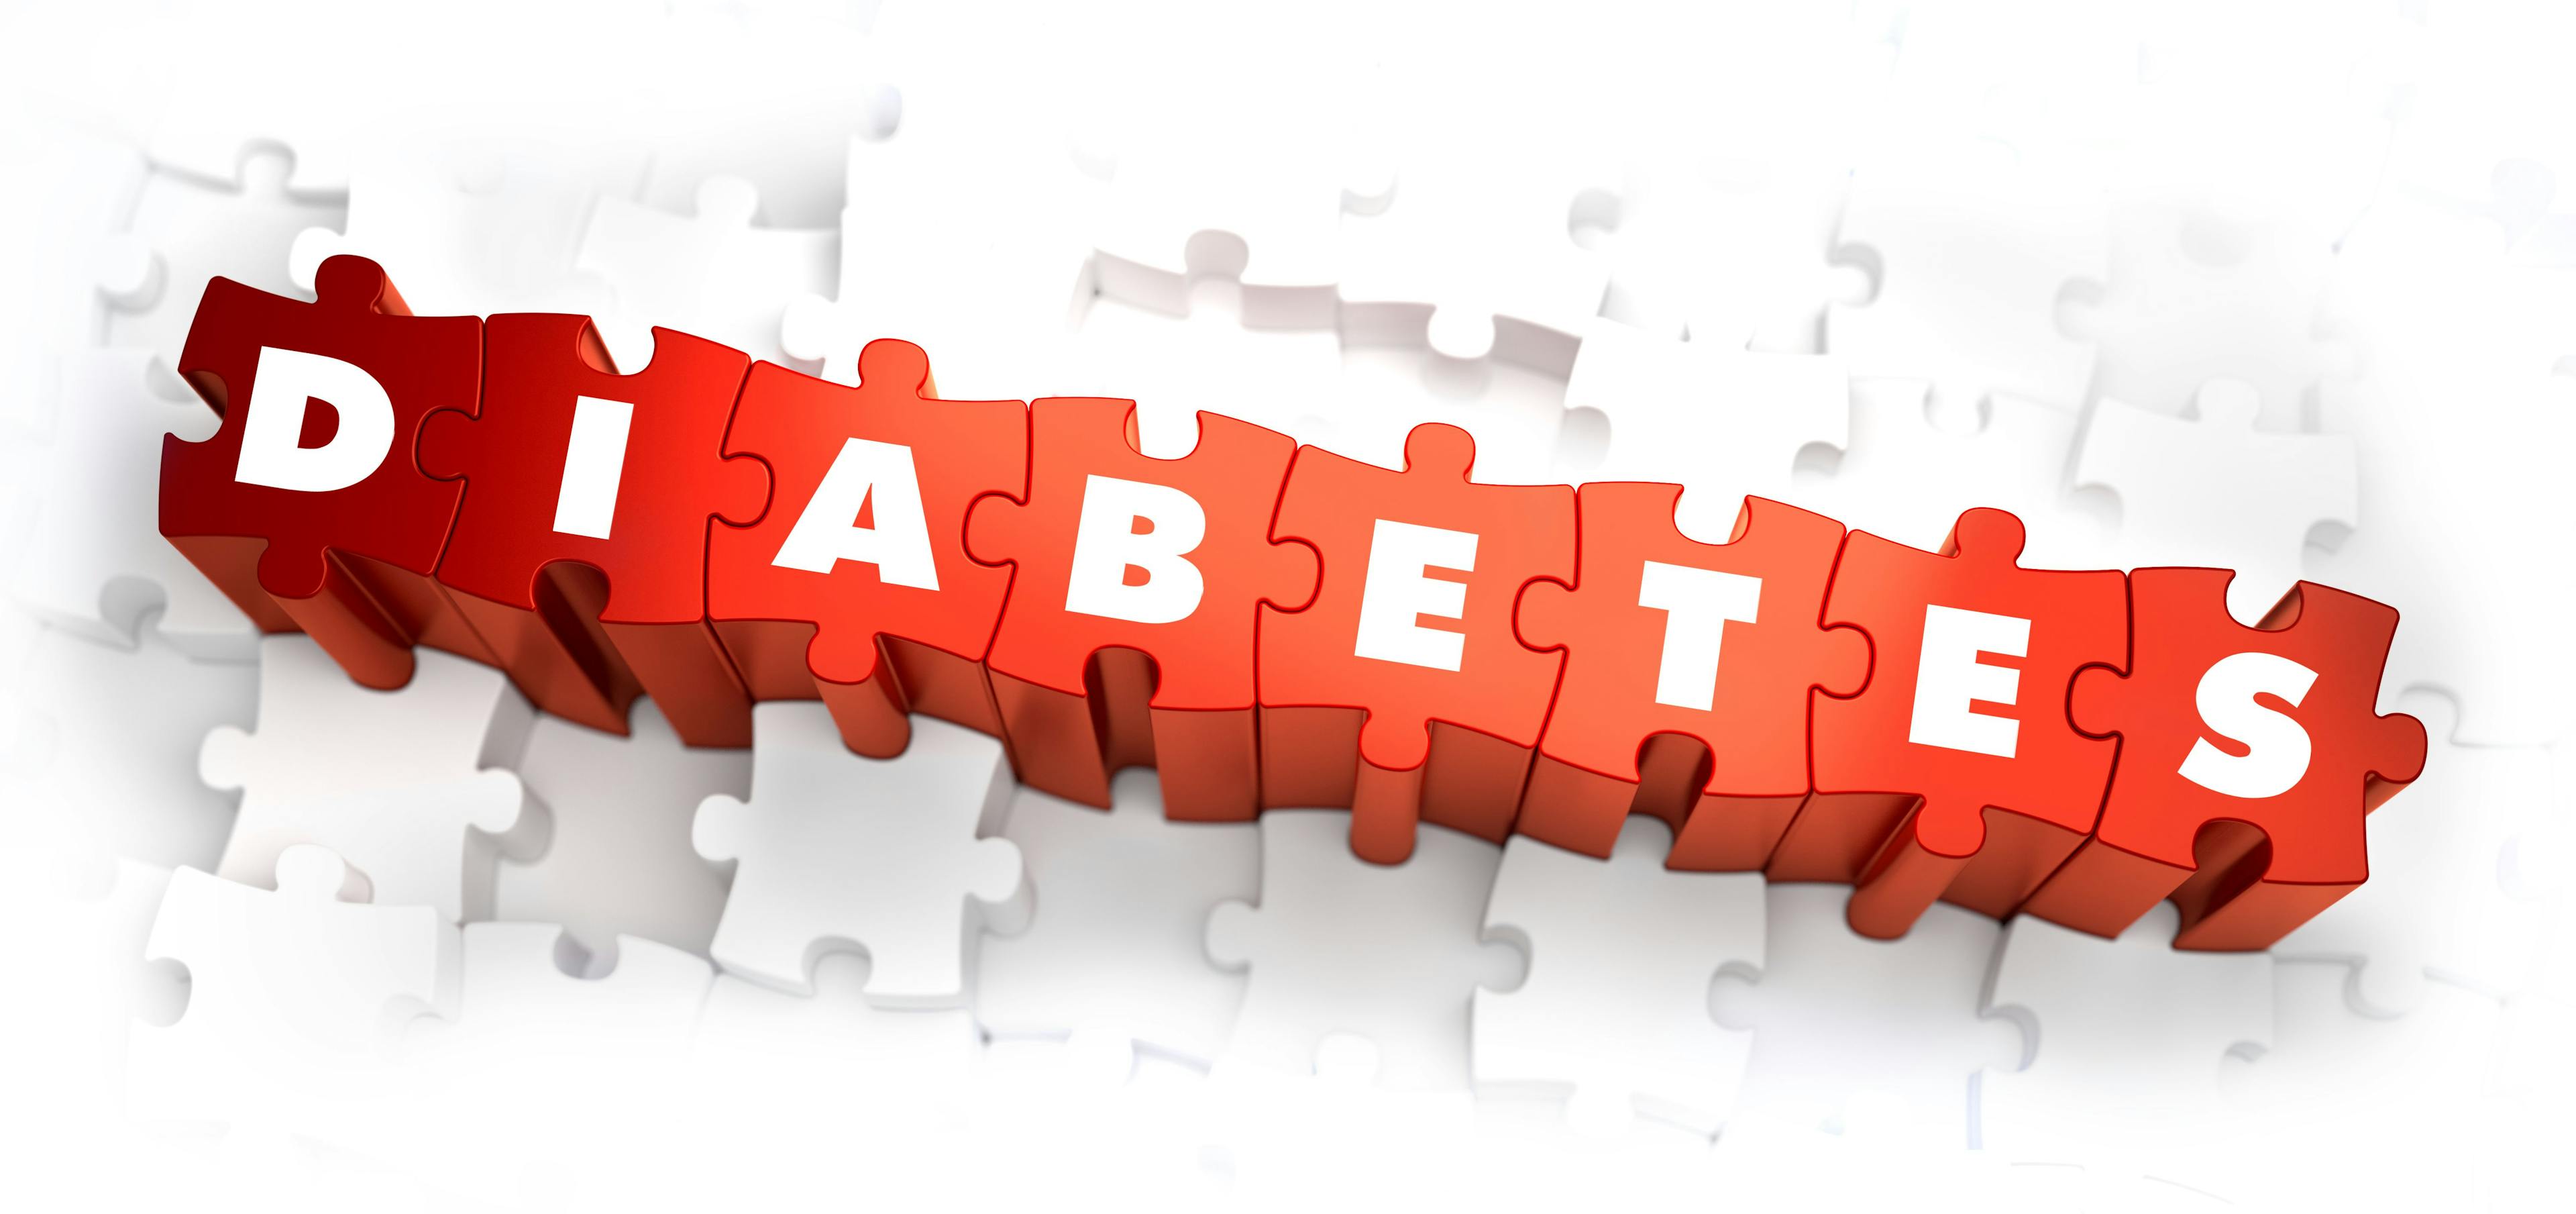 Tubeless, On-Body Automated Insulin Delivery System Shows Benefits for Glucose Control